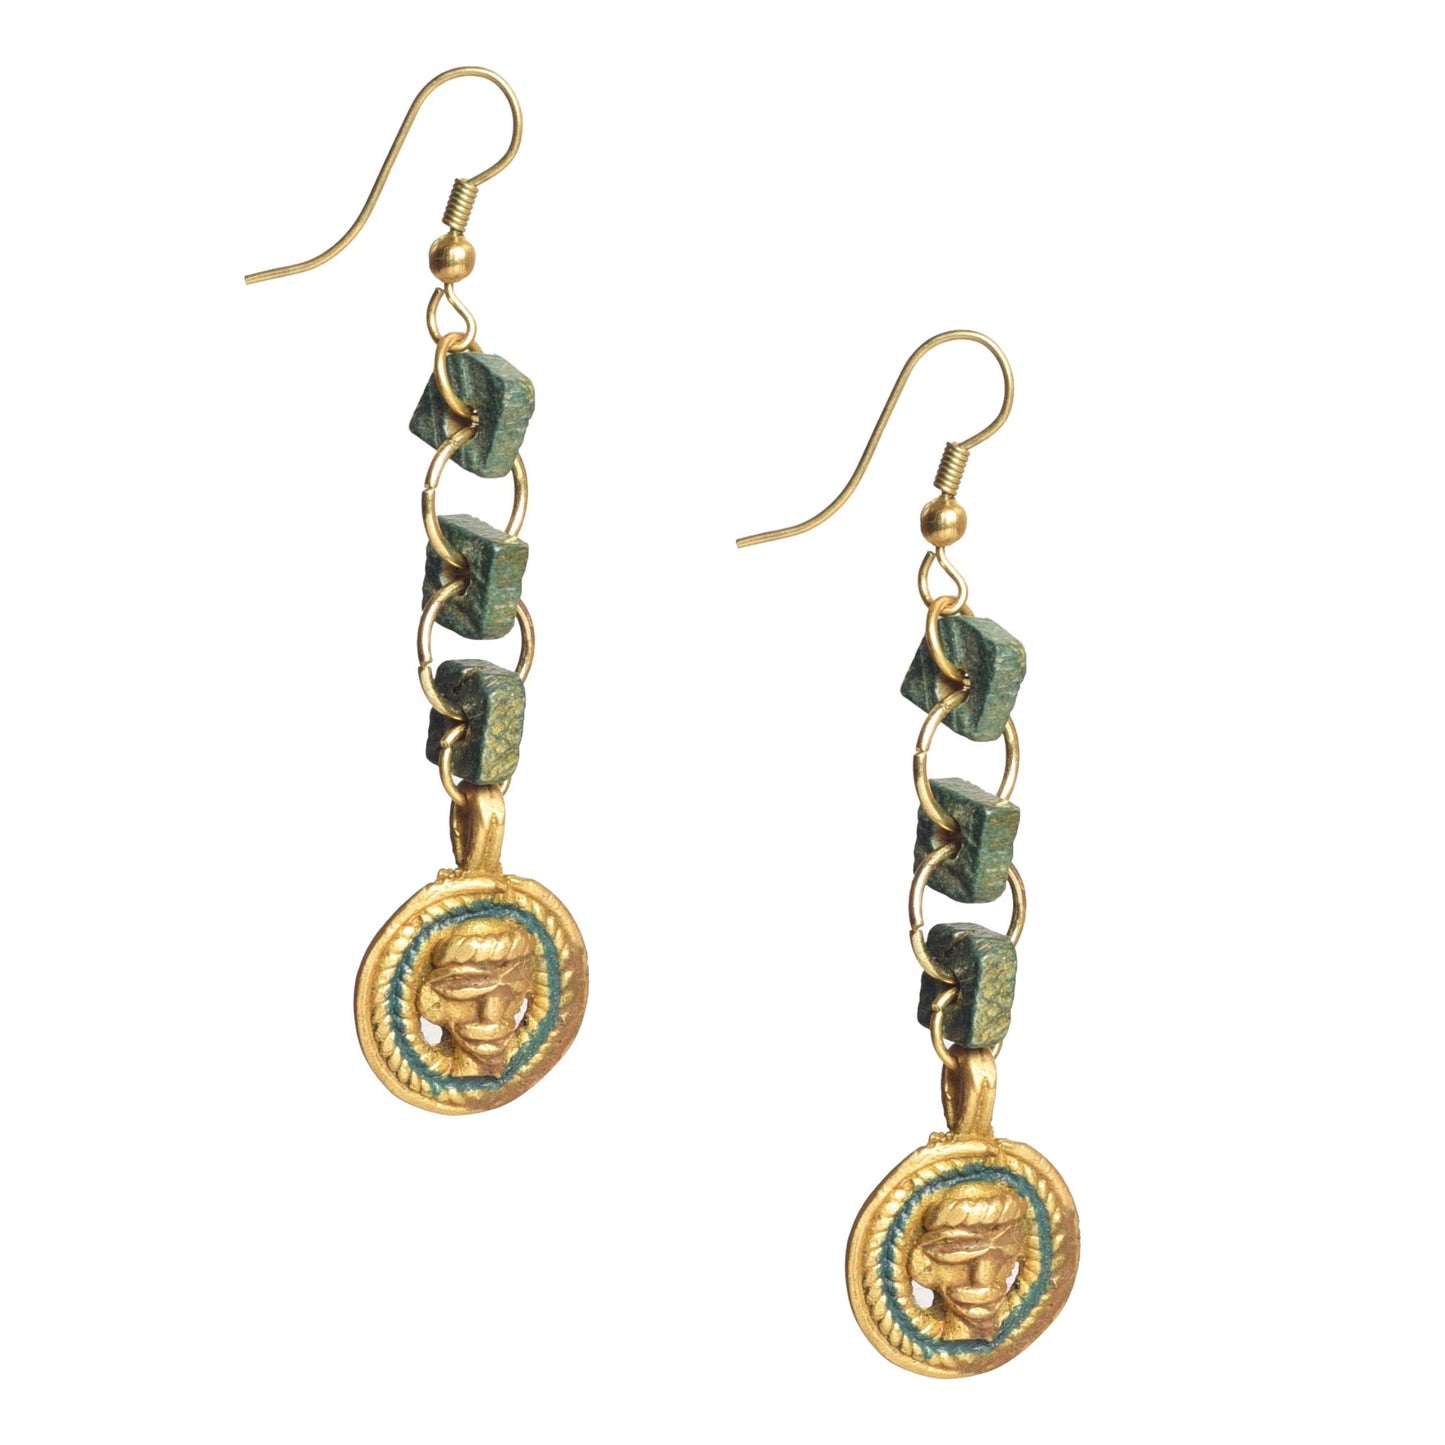 The Olive Queen Handcrafted Tribal Earrings